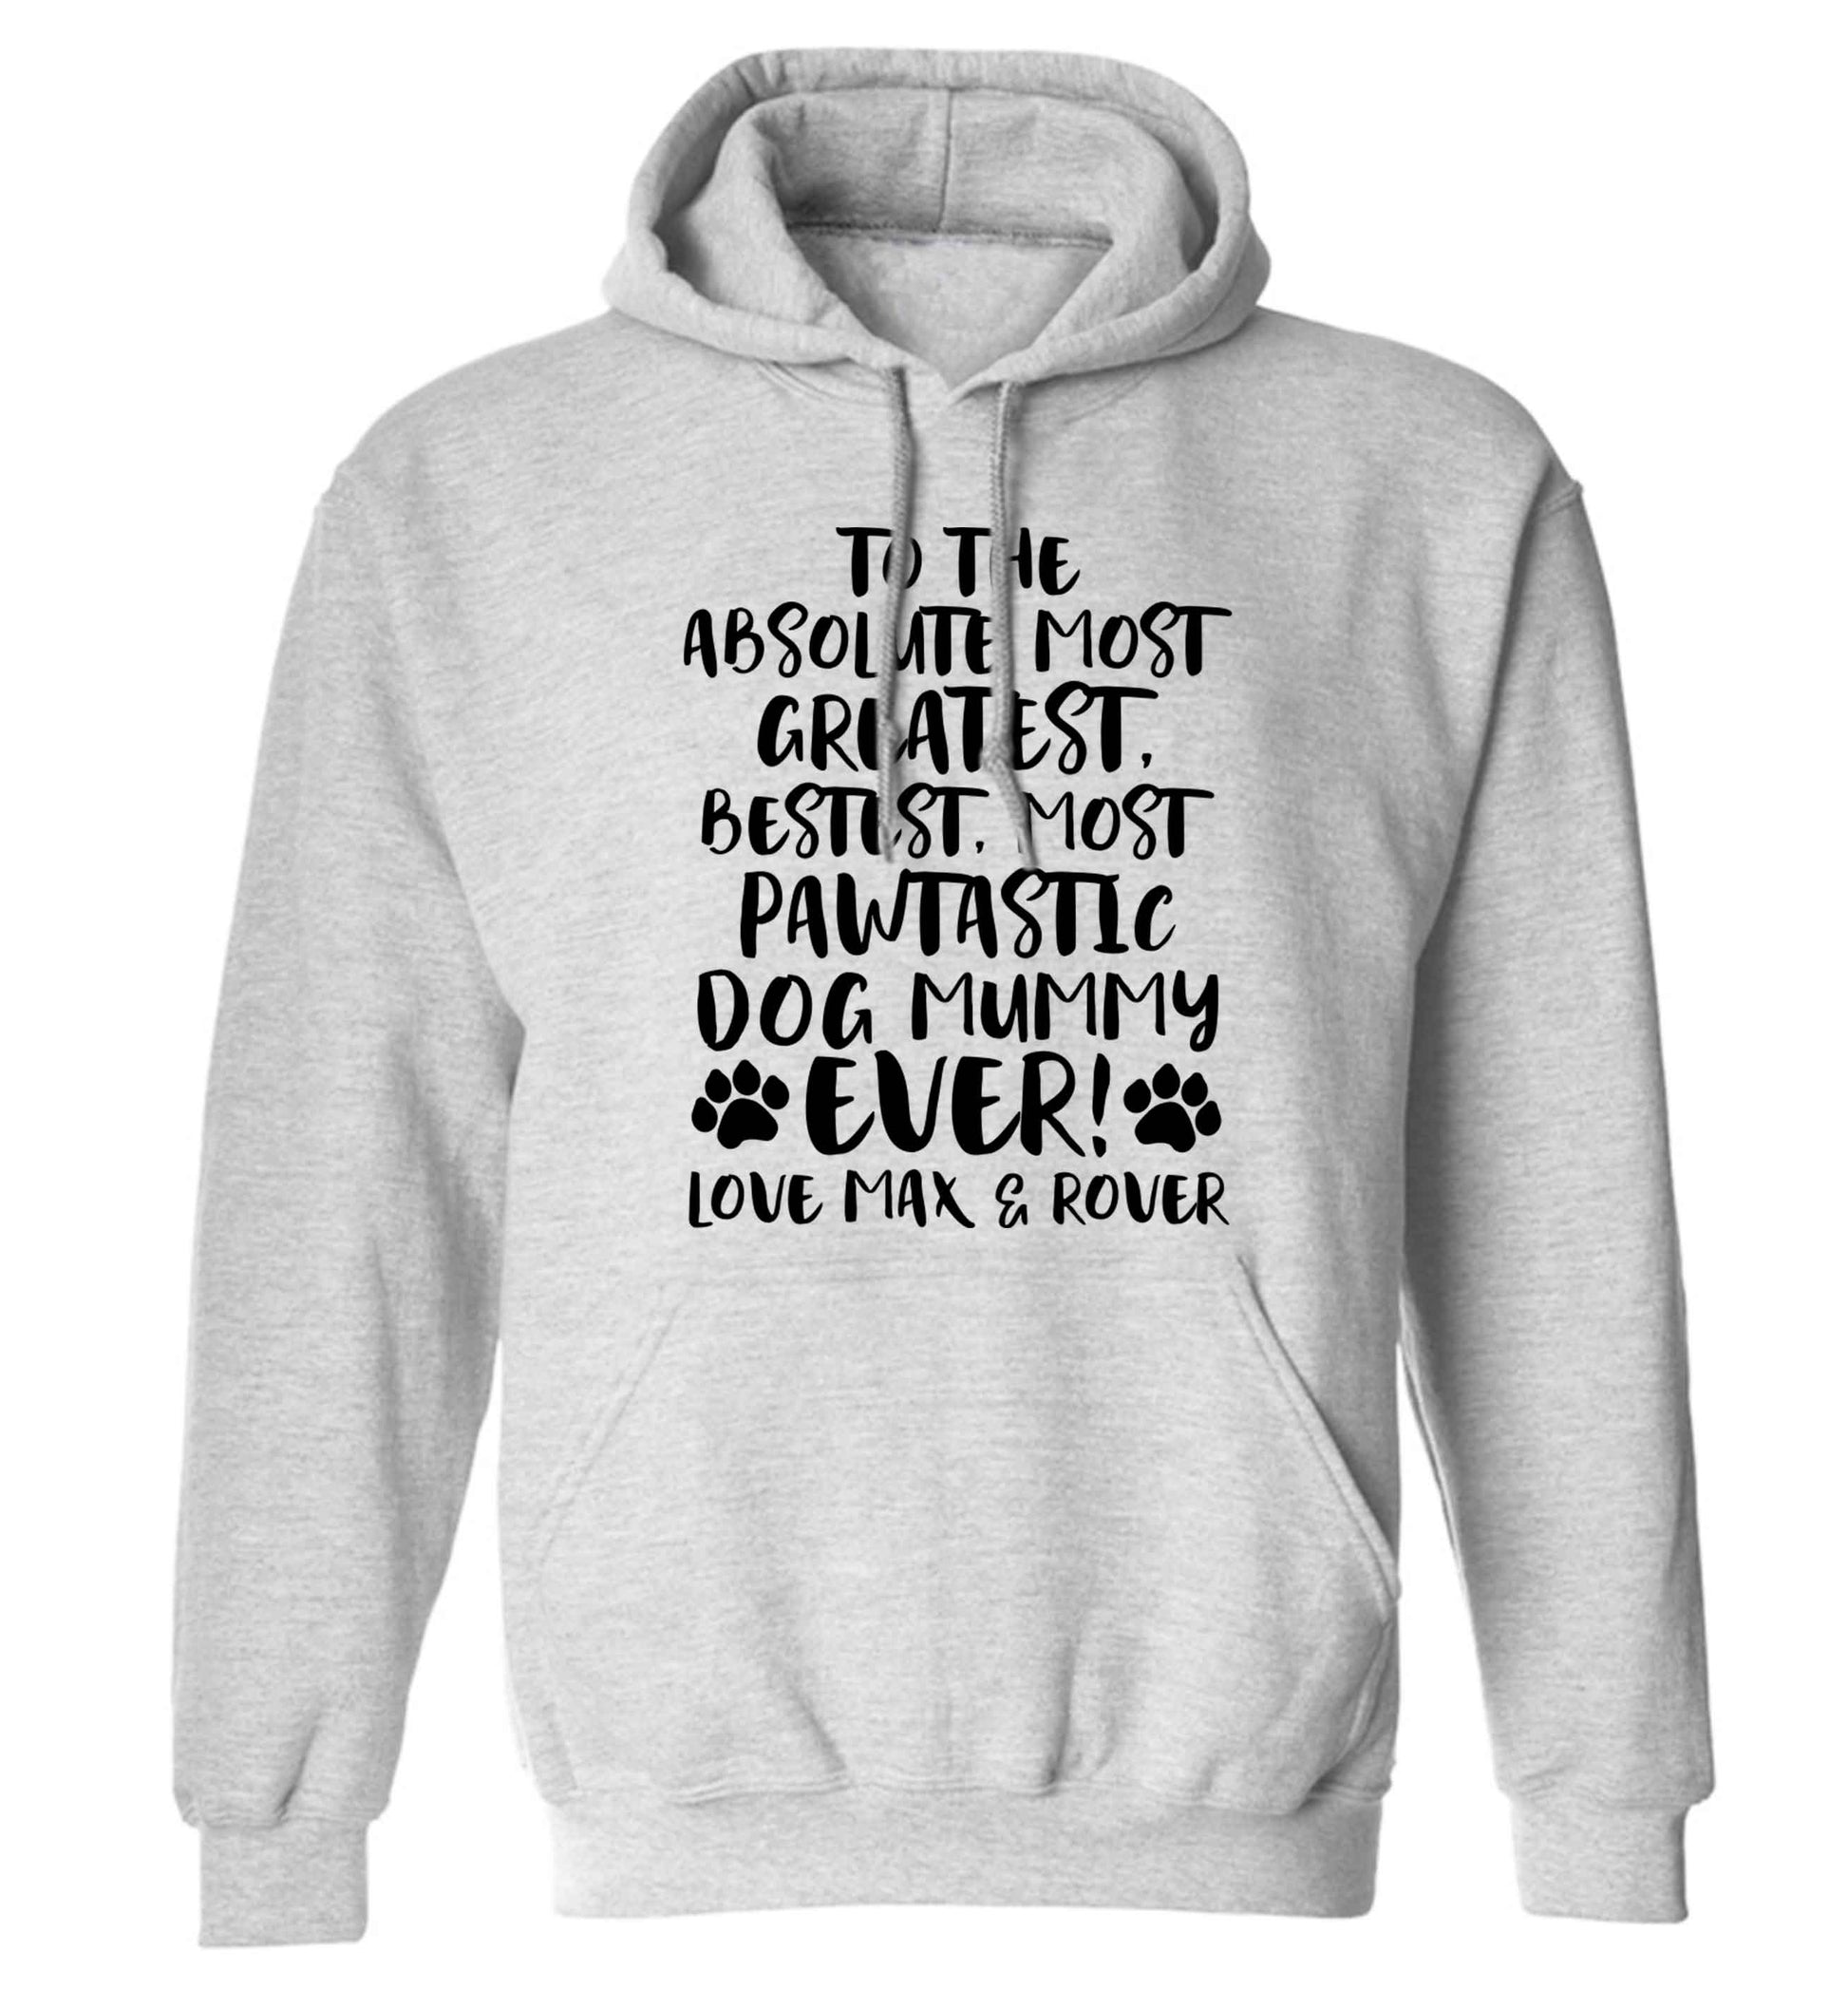 Personalsied to the most pawtastic dog mummy ever adults unisex grey hoodie 2XL